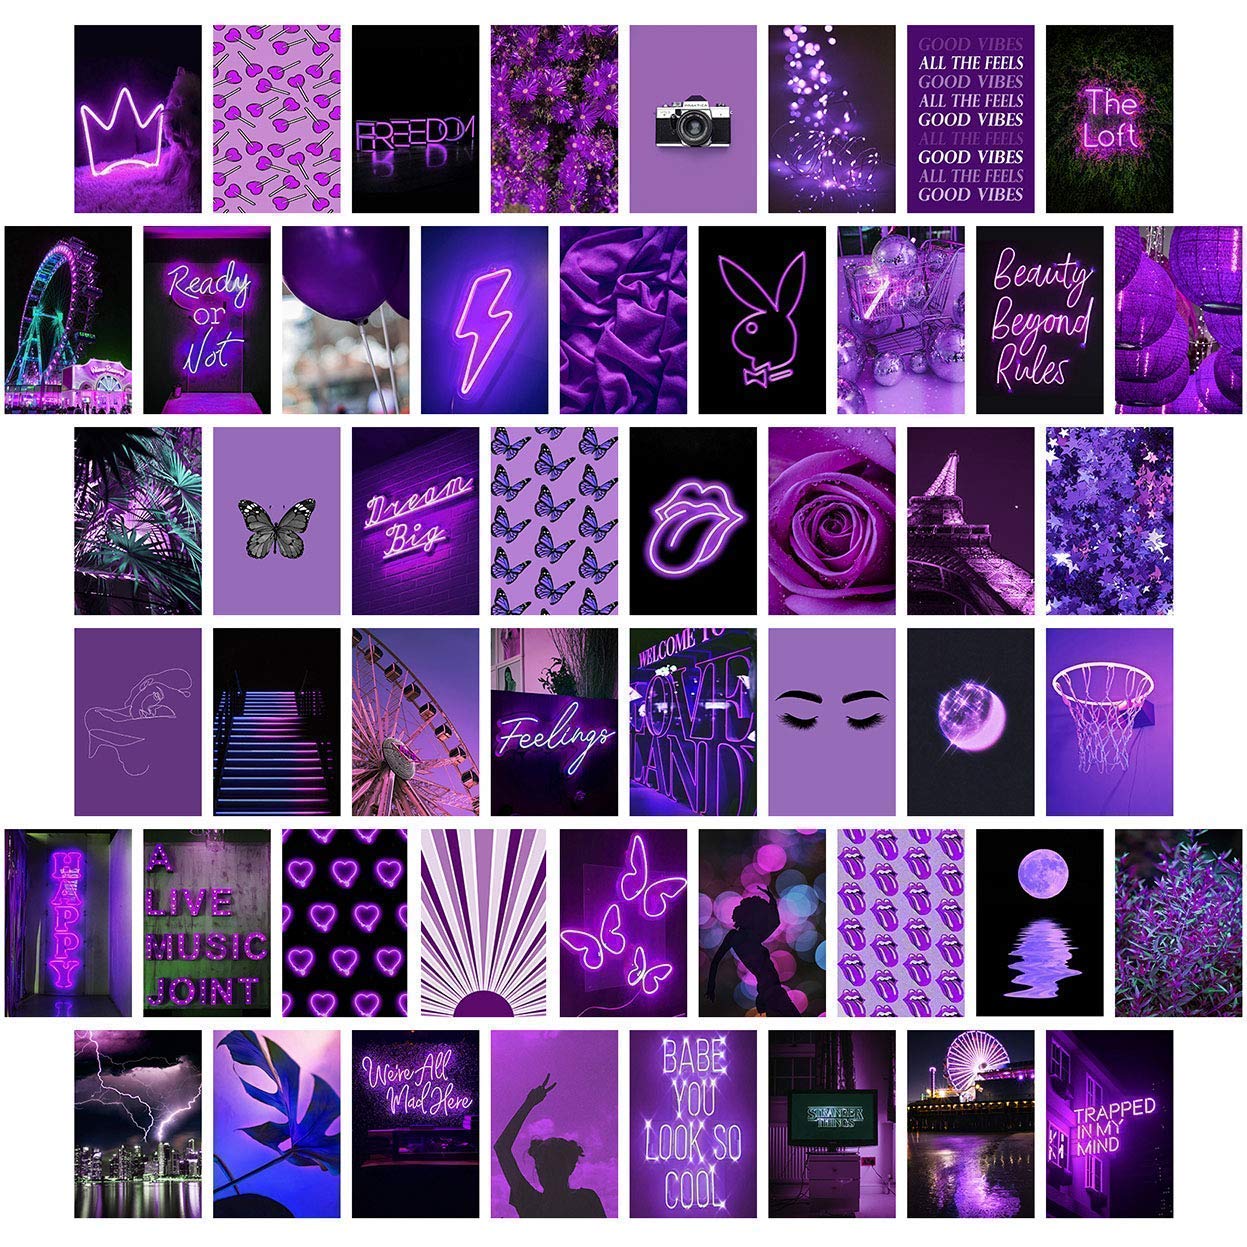 Purple Wall Collage Kit Aesthetic Picture, Bedroom Decor for Teen Girls, Wall Collage Kit, Collage Kit for Wall Aesthetic, VSCO Girls Bedroom Decor, Aesthetic Posters, Collage Kit (50 Set 4x6 inch)